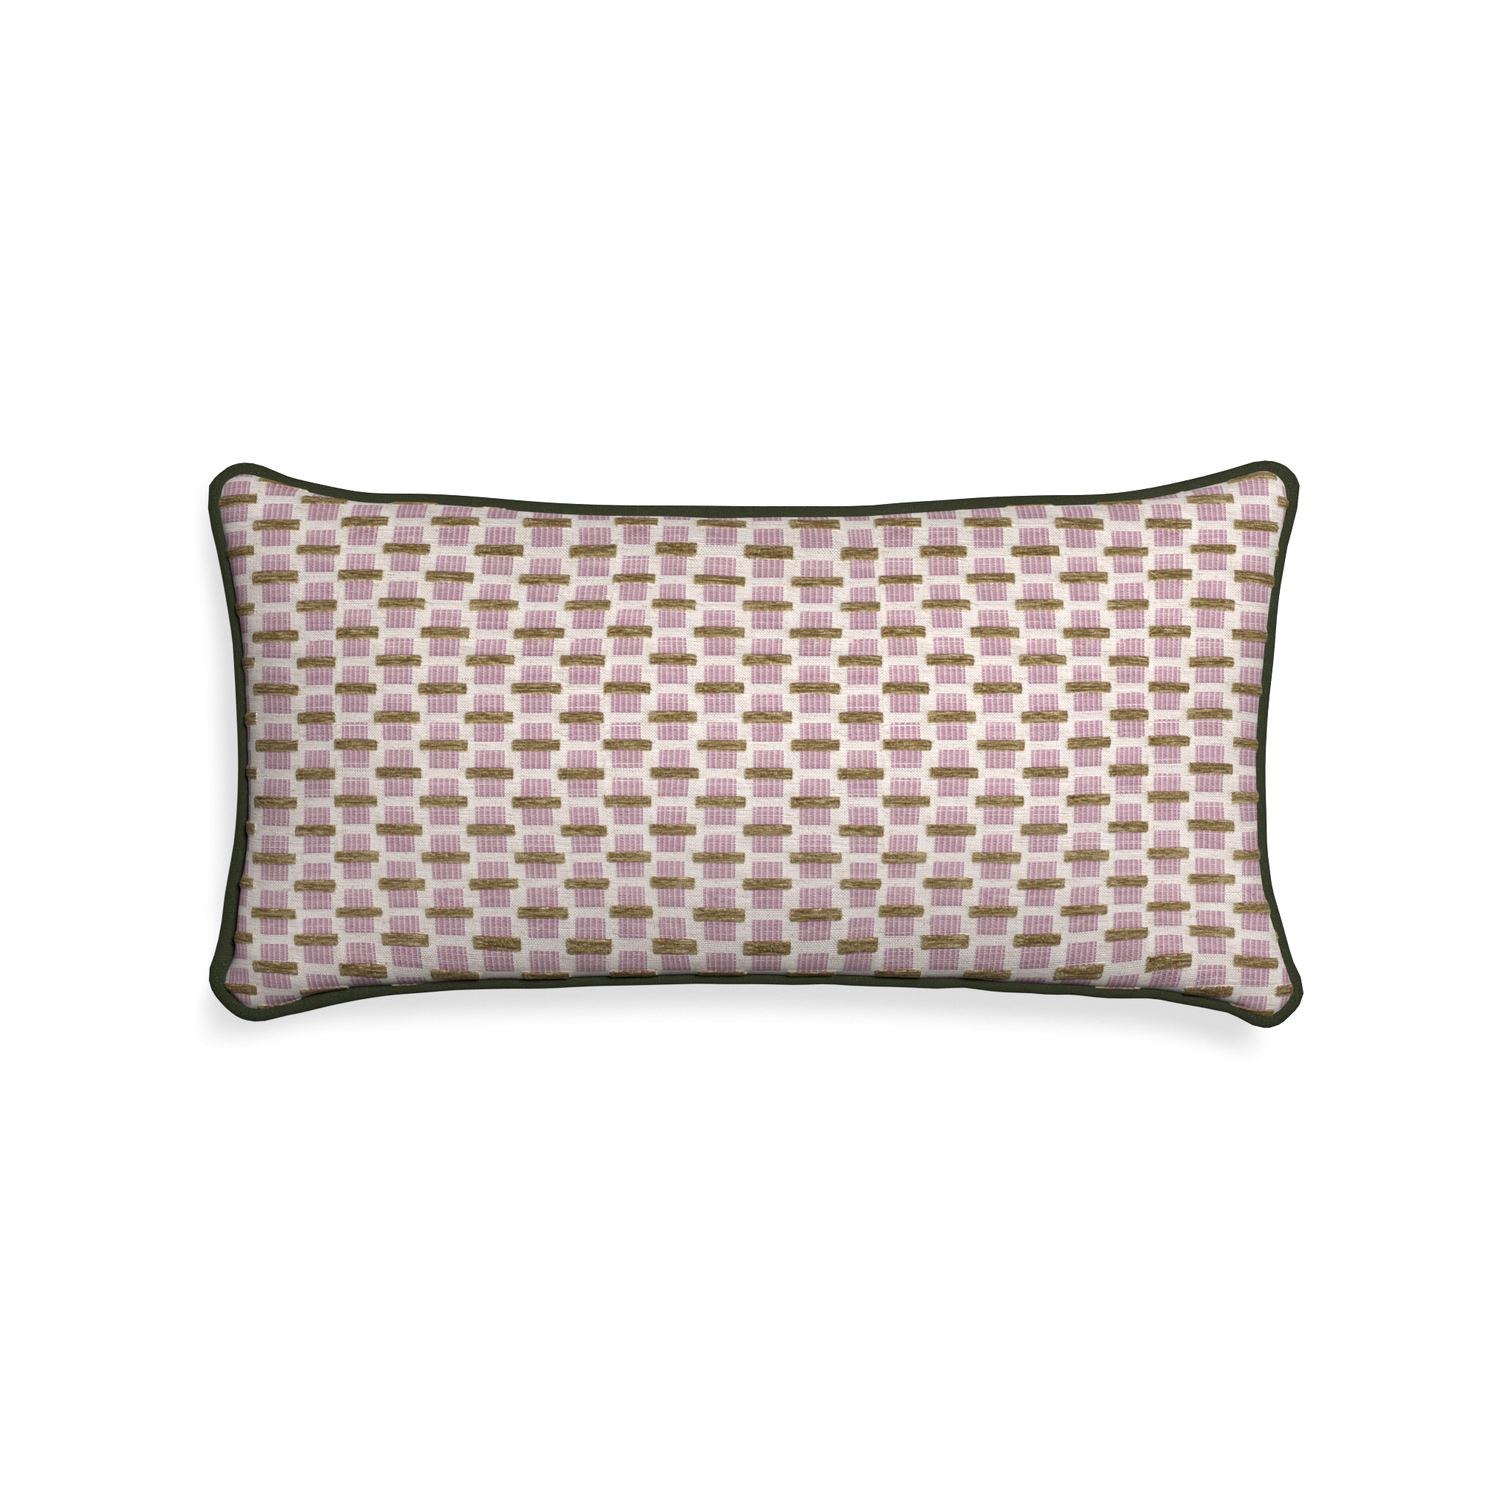 Midi-lumbar willow orchid custom pink geometric chenillepillow with f piping on white background